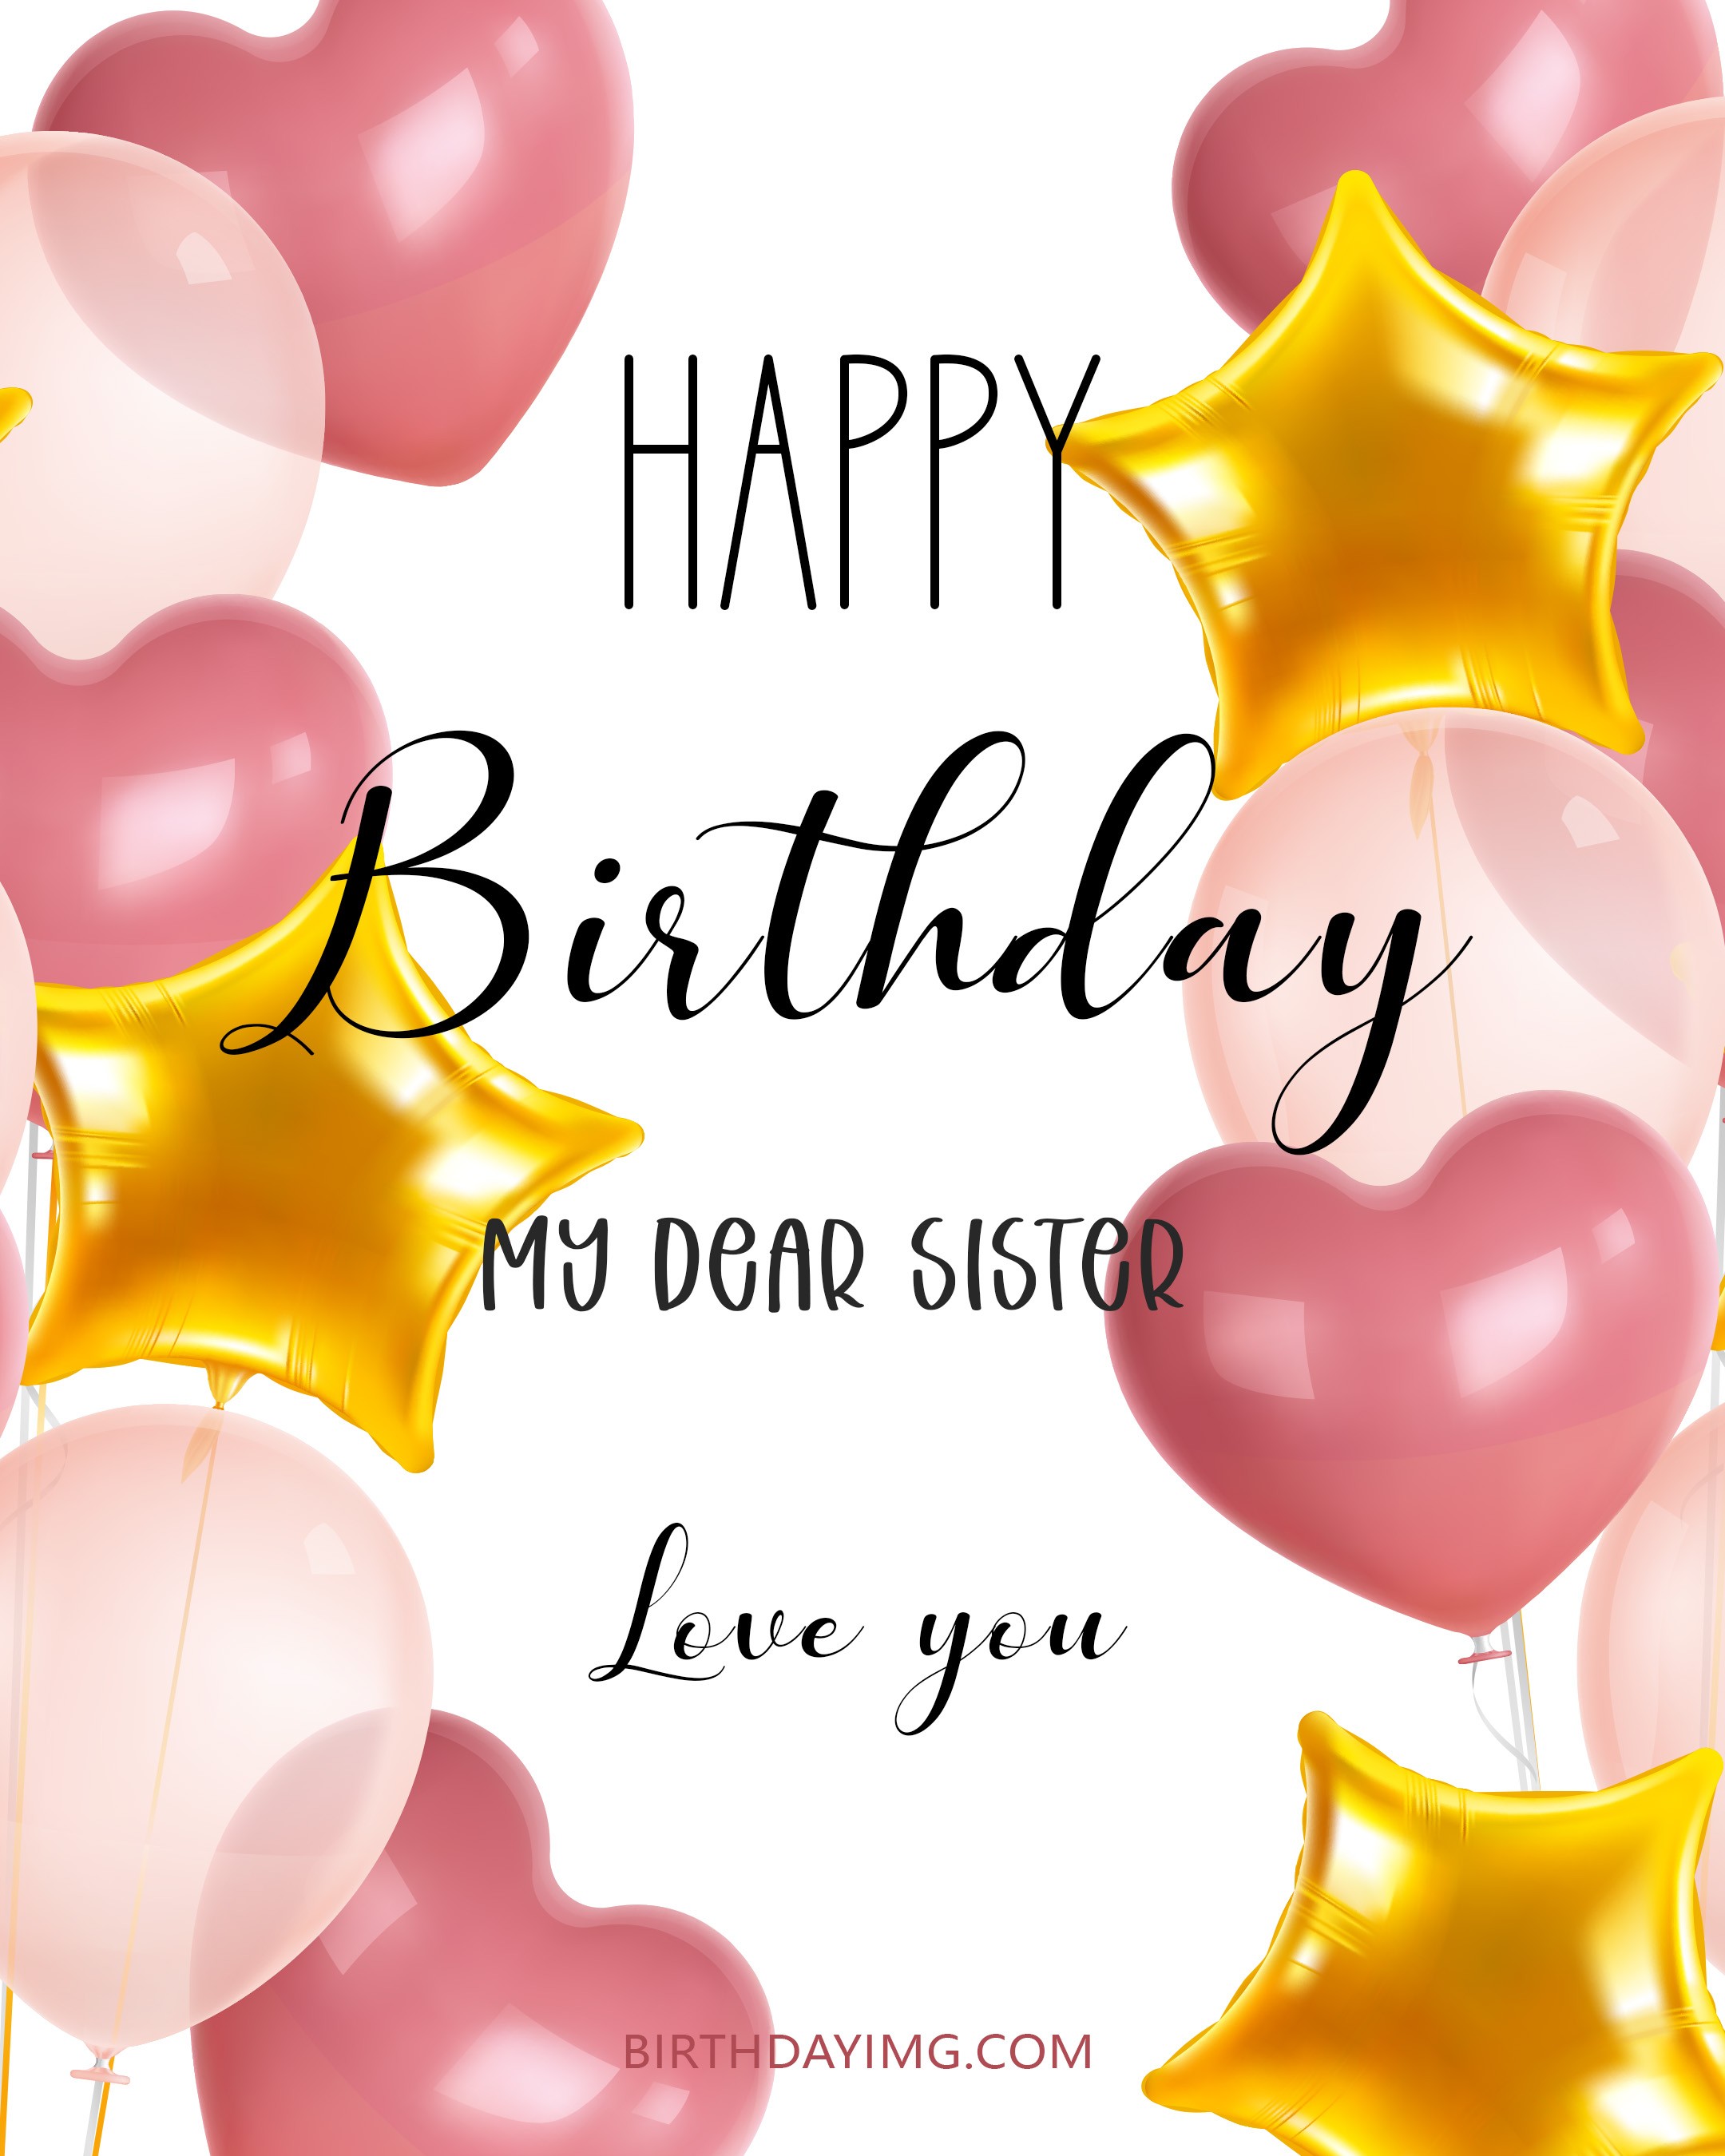 Free Happy Birthday Image For Sister With Balloons - birthdayimg.com